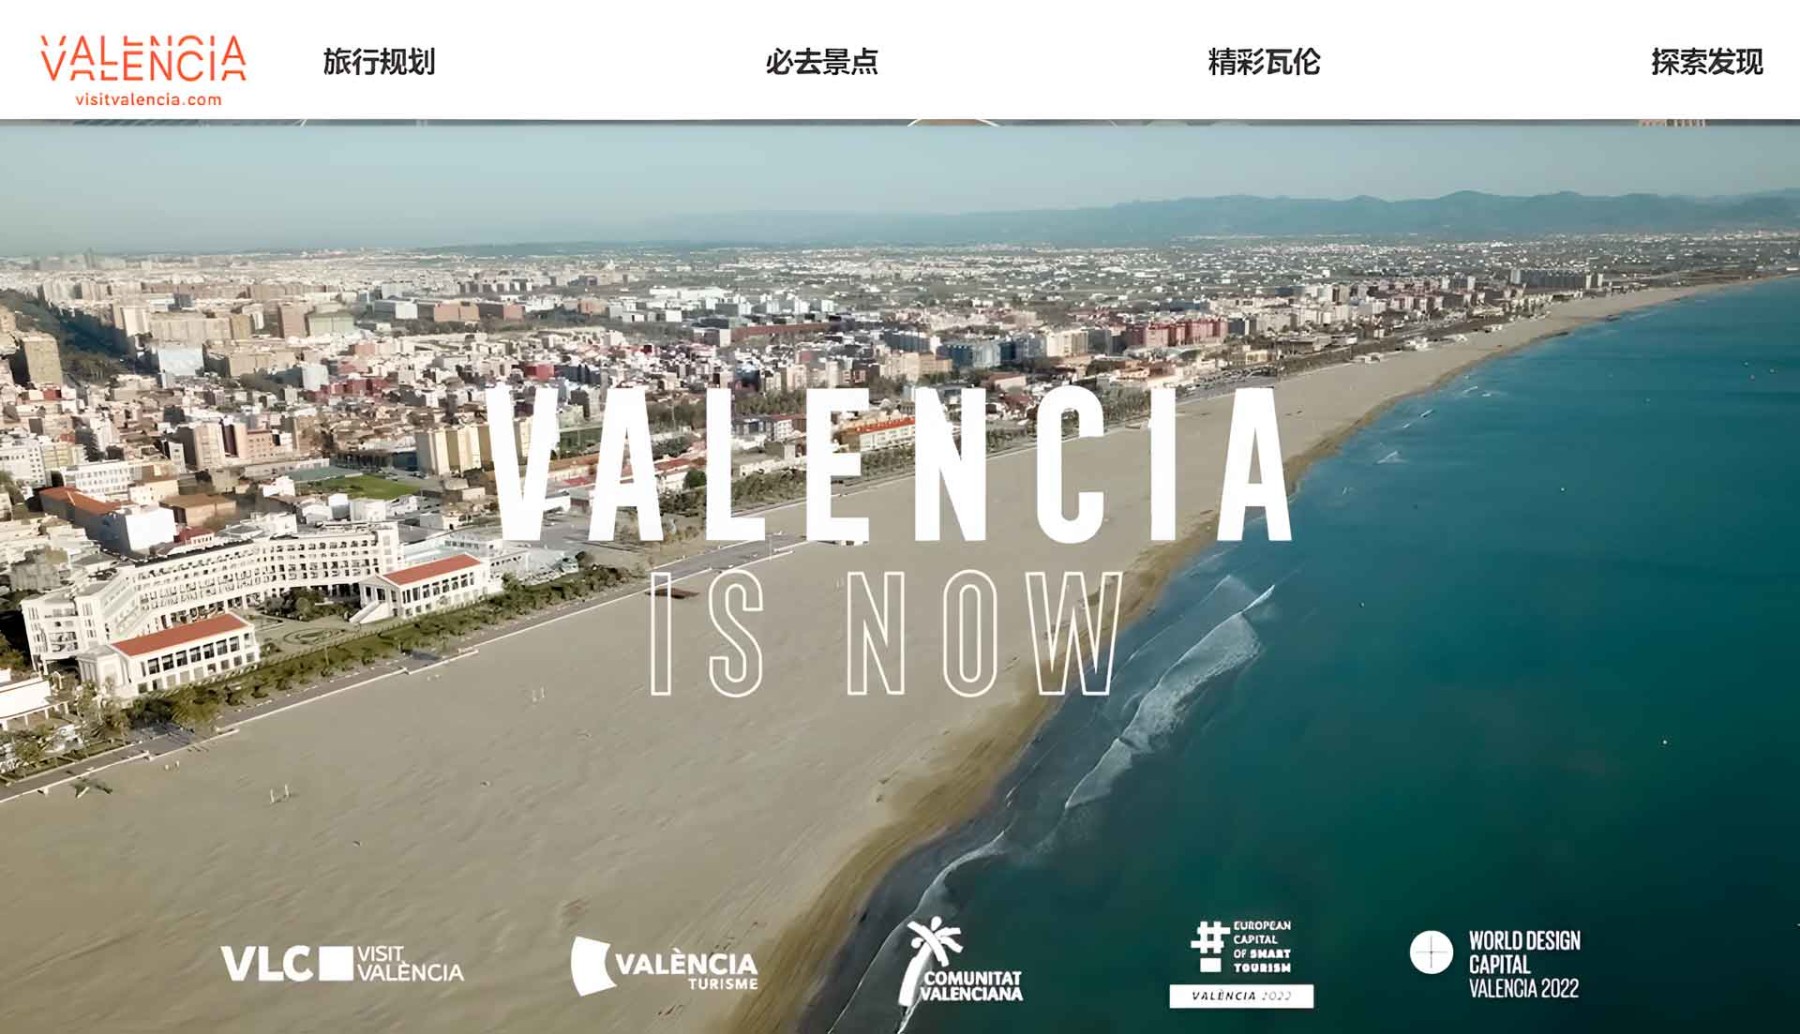 Visit Valencia’s Promotion on Chinese Social Networks